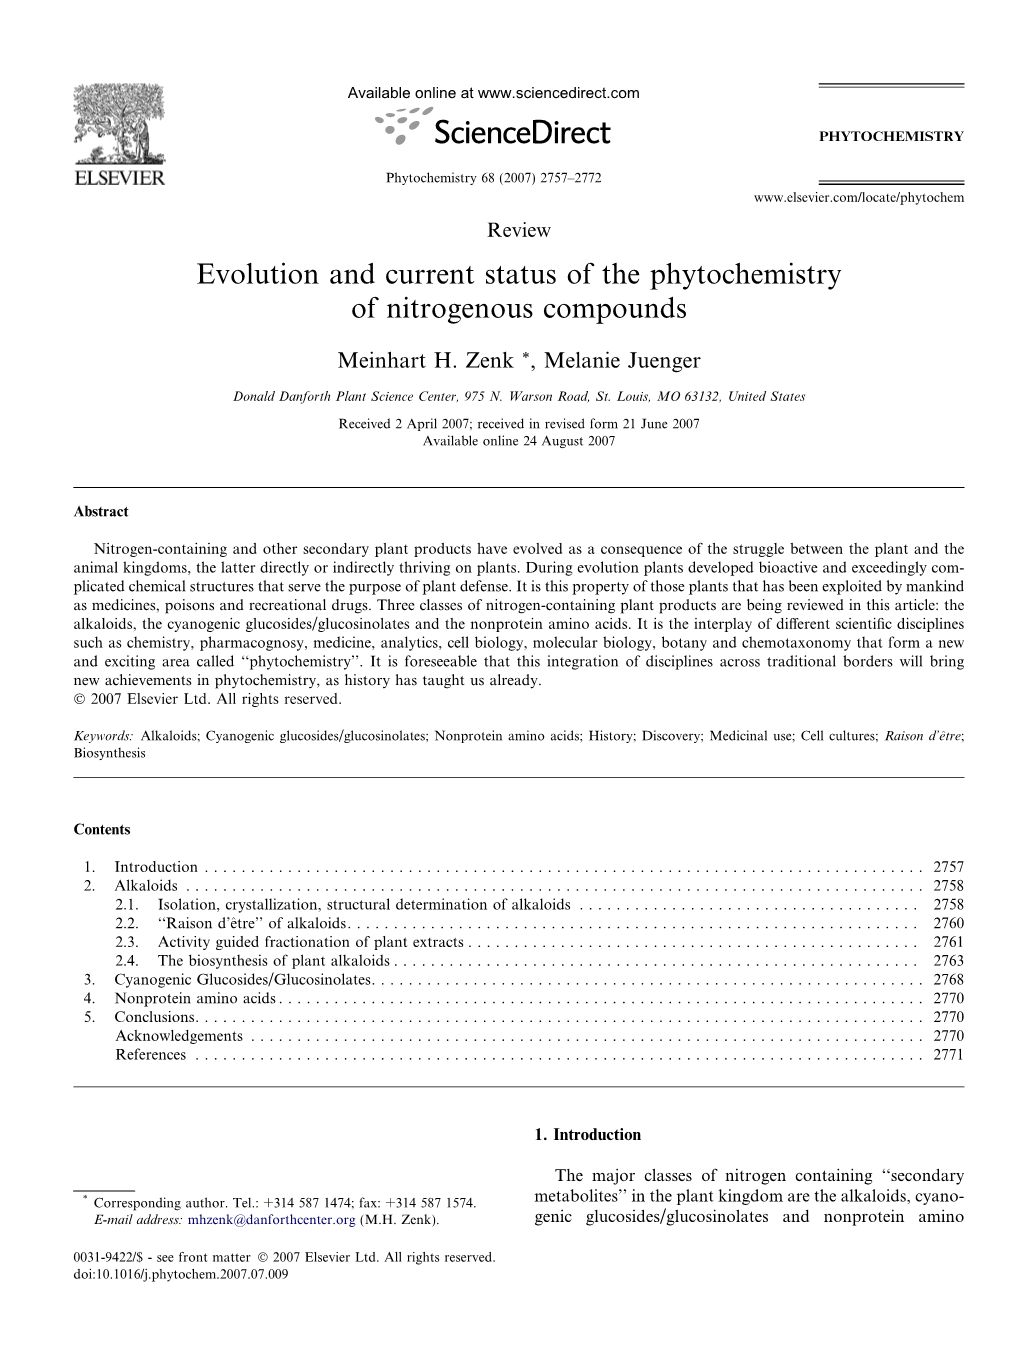 Evolution and Current Status of the Phytochemistry of Nitrogenous Compounds